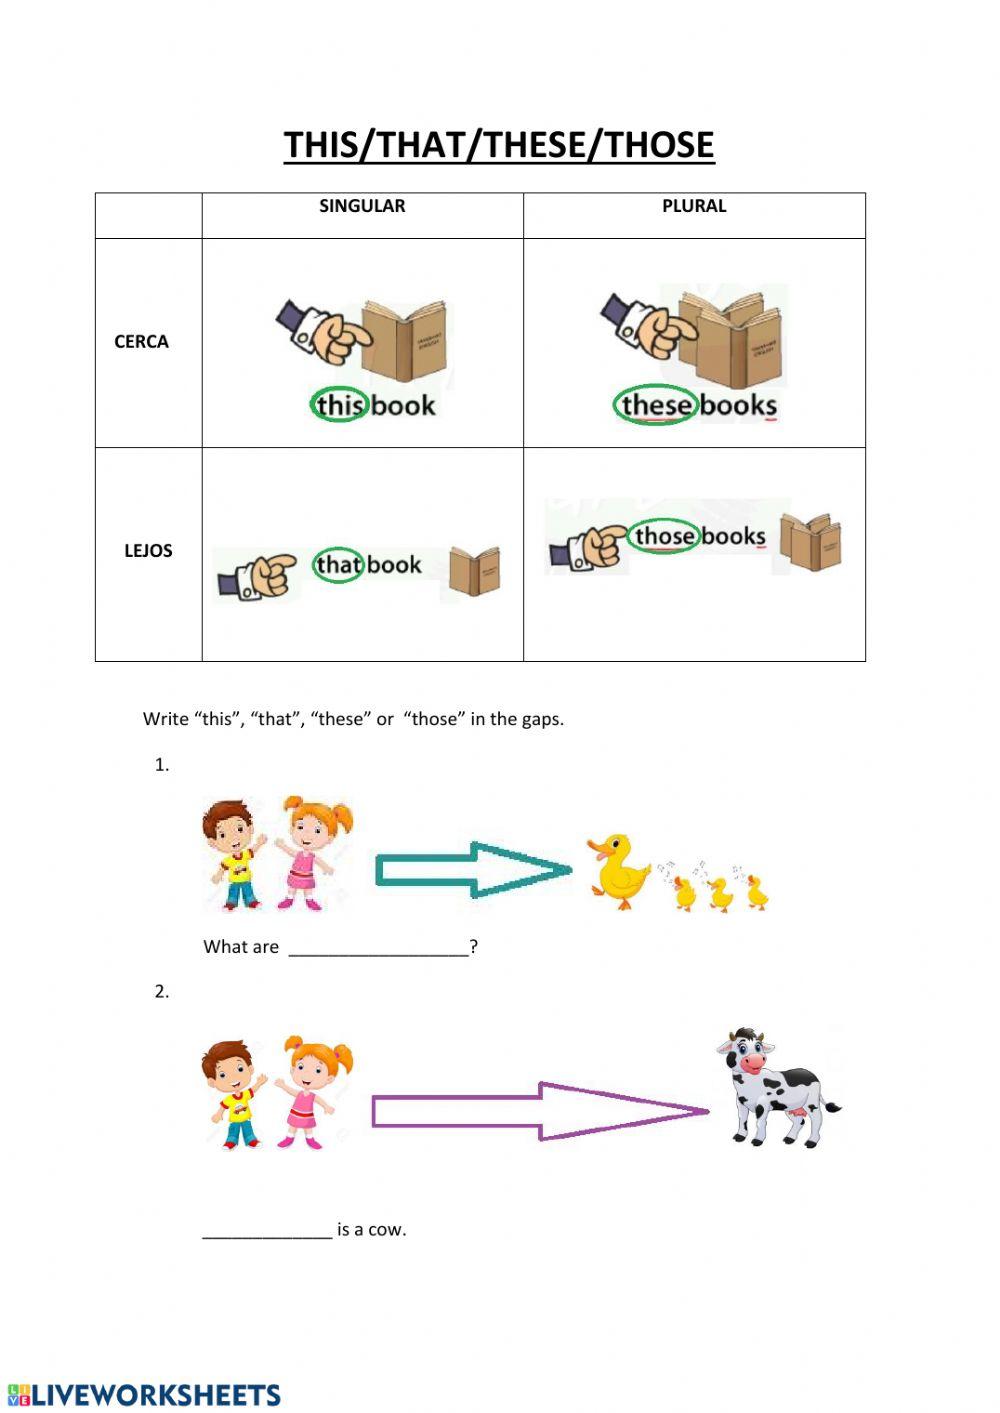 This-that-these-those interactive worksheet | Live Worksheets